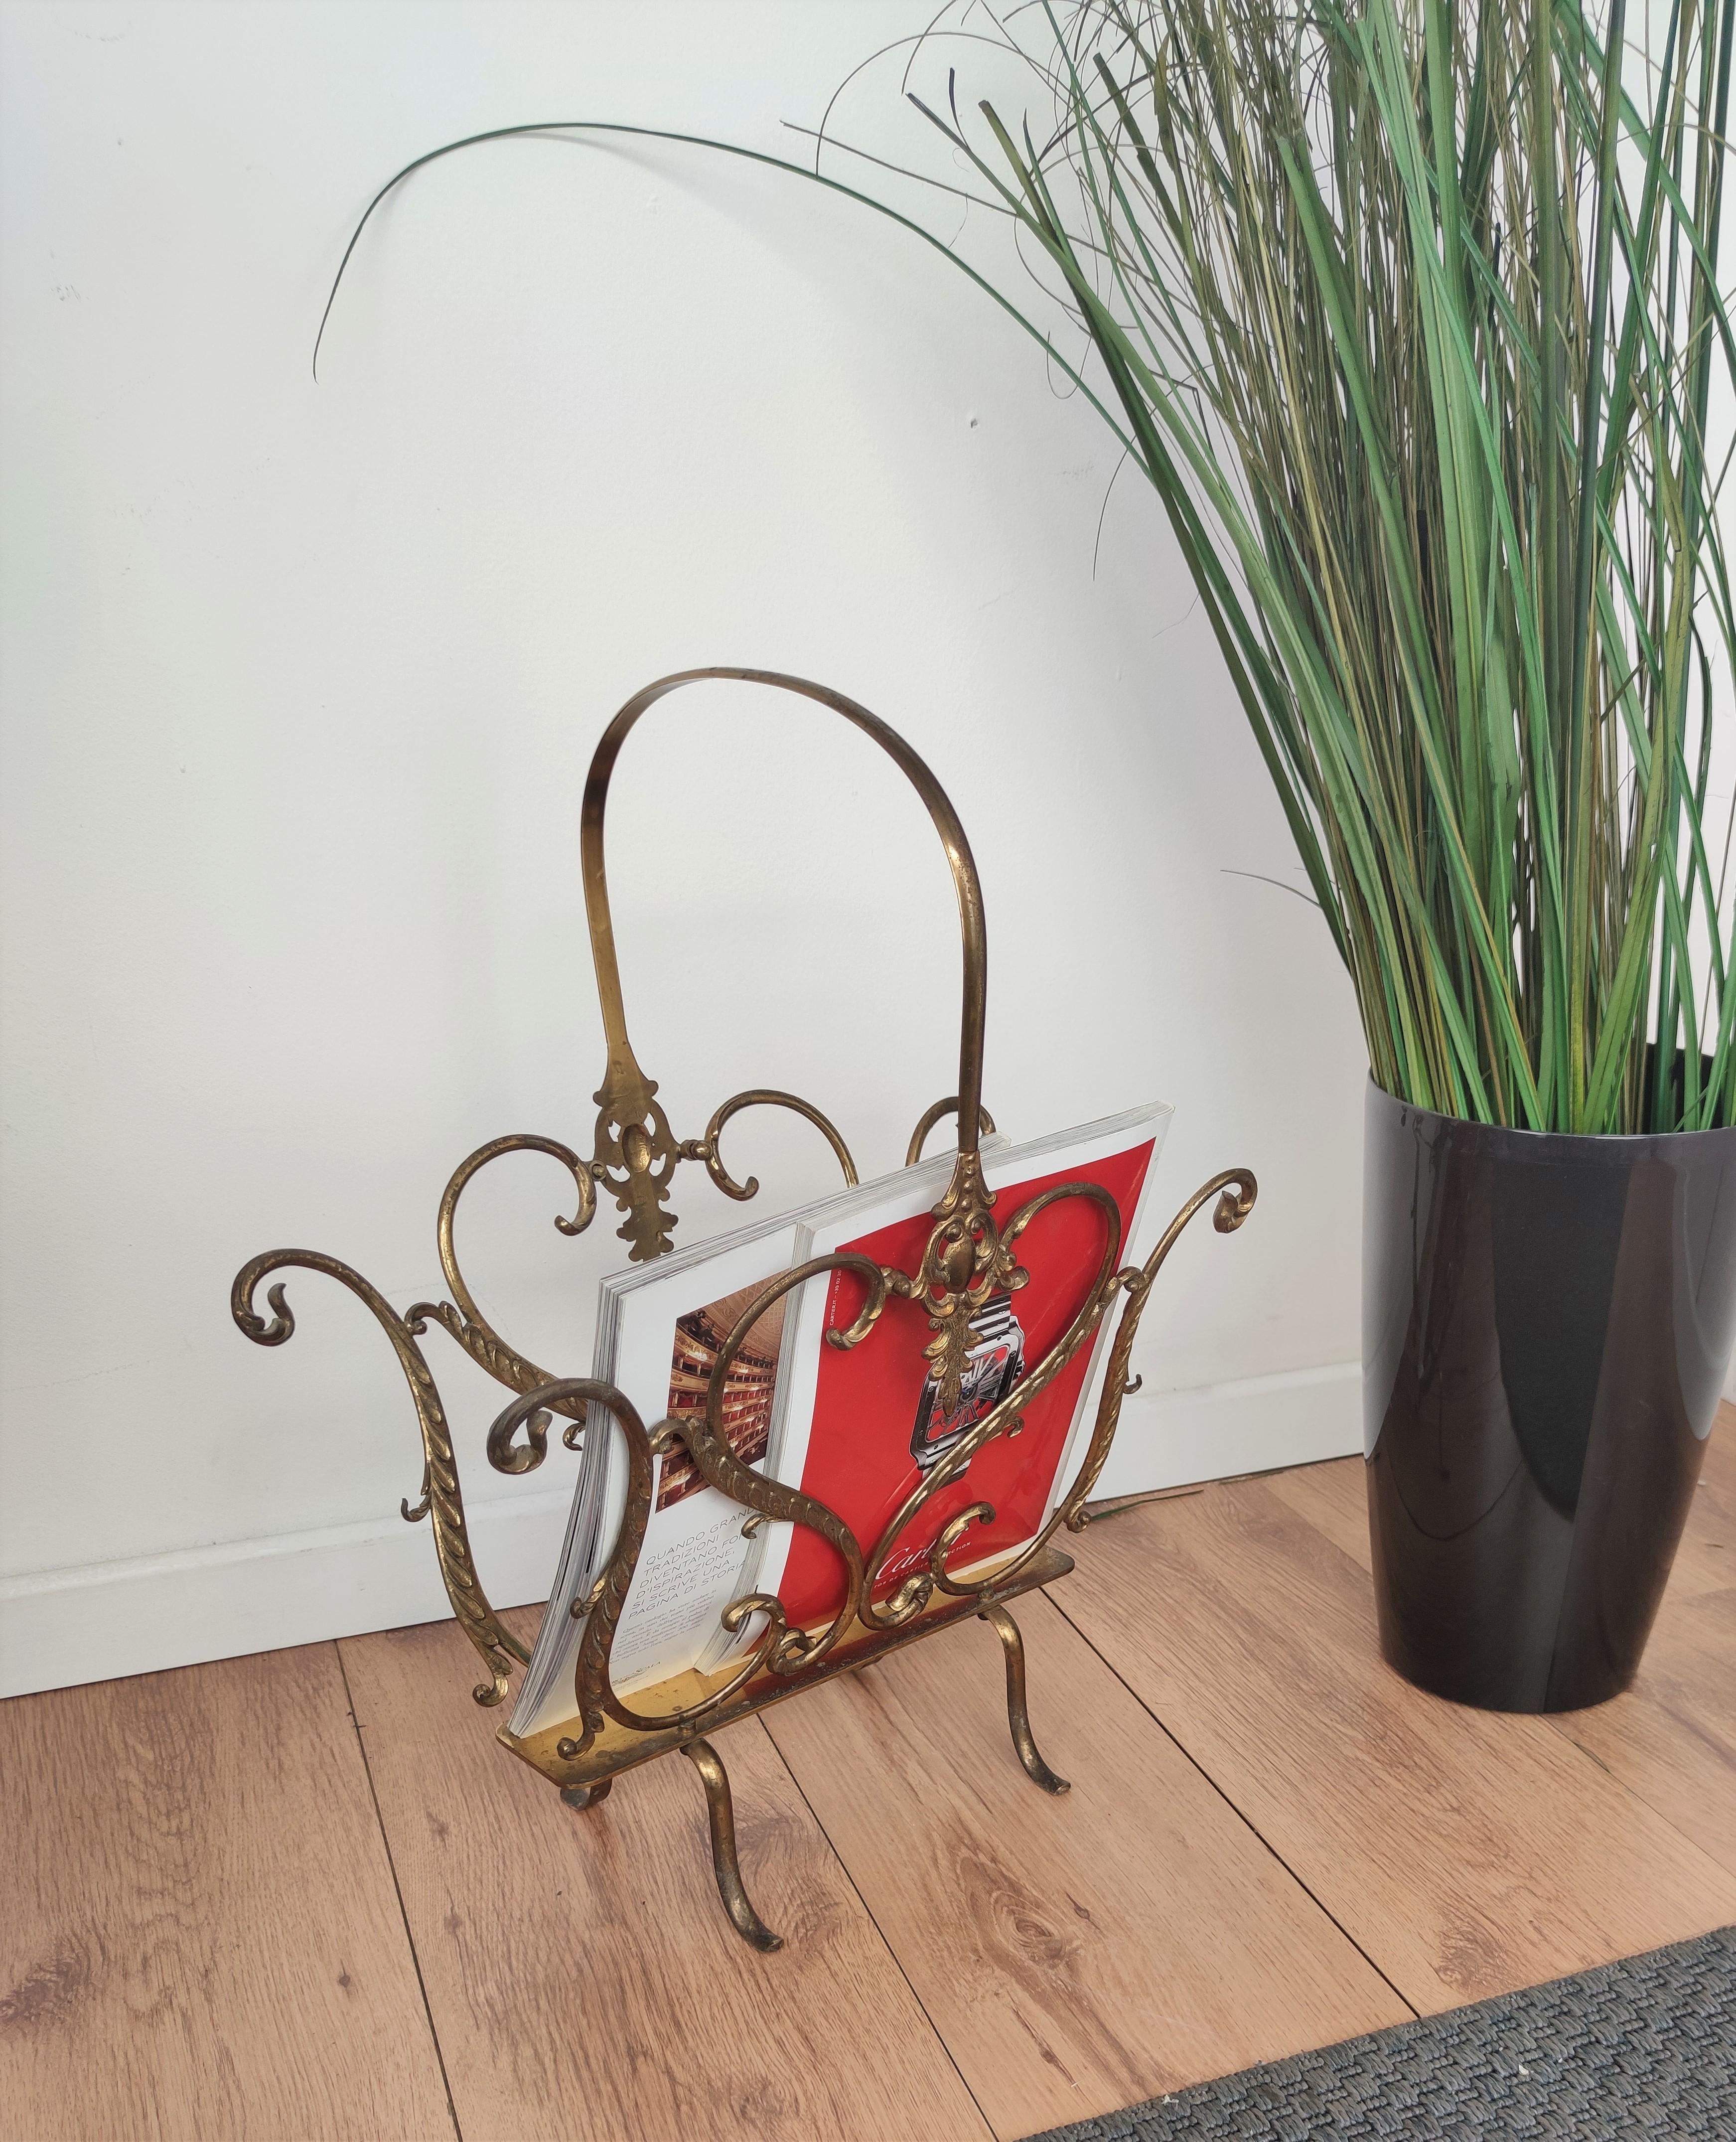 1950s Italian Midcentury Neoclassical Regency Brass Magazine Stand or Rack For Sale 2